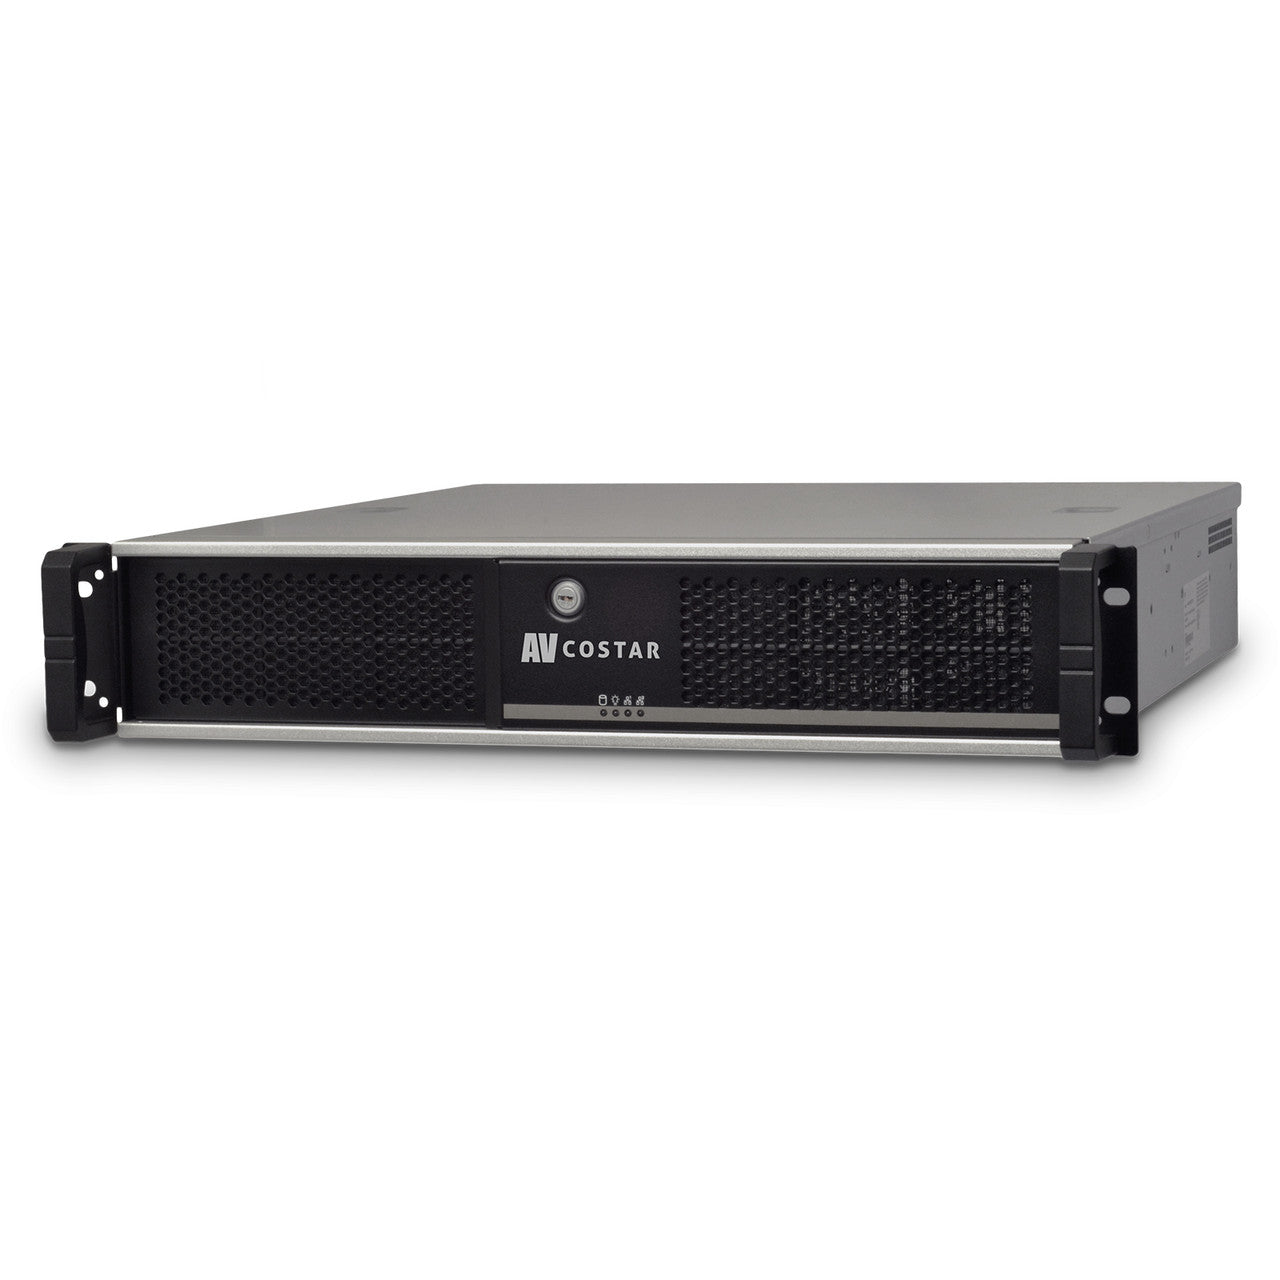 Arecont Vision AV-CSCX36TR 2U Compact Server, Windows, 36TB, Removable HDD Bay RAID5 (4x6TB 20TB Usable) (Recording Licenses Not Included)